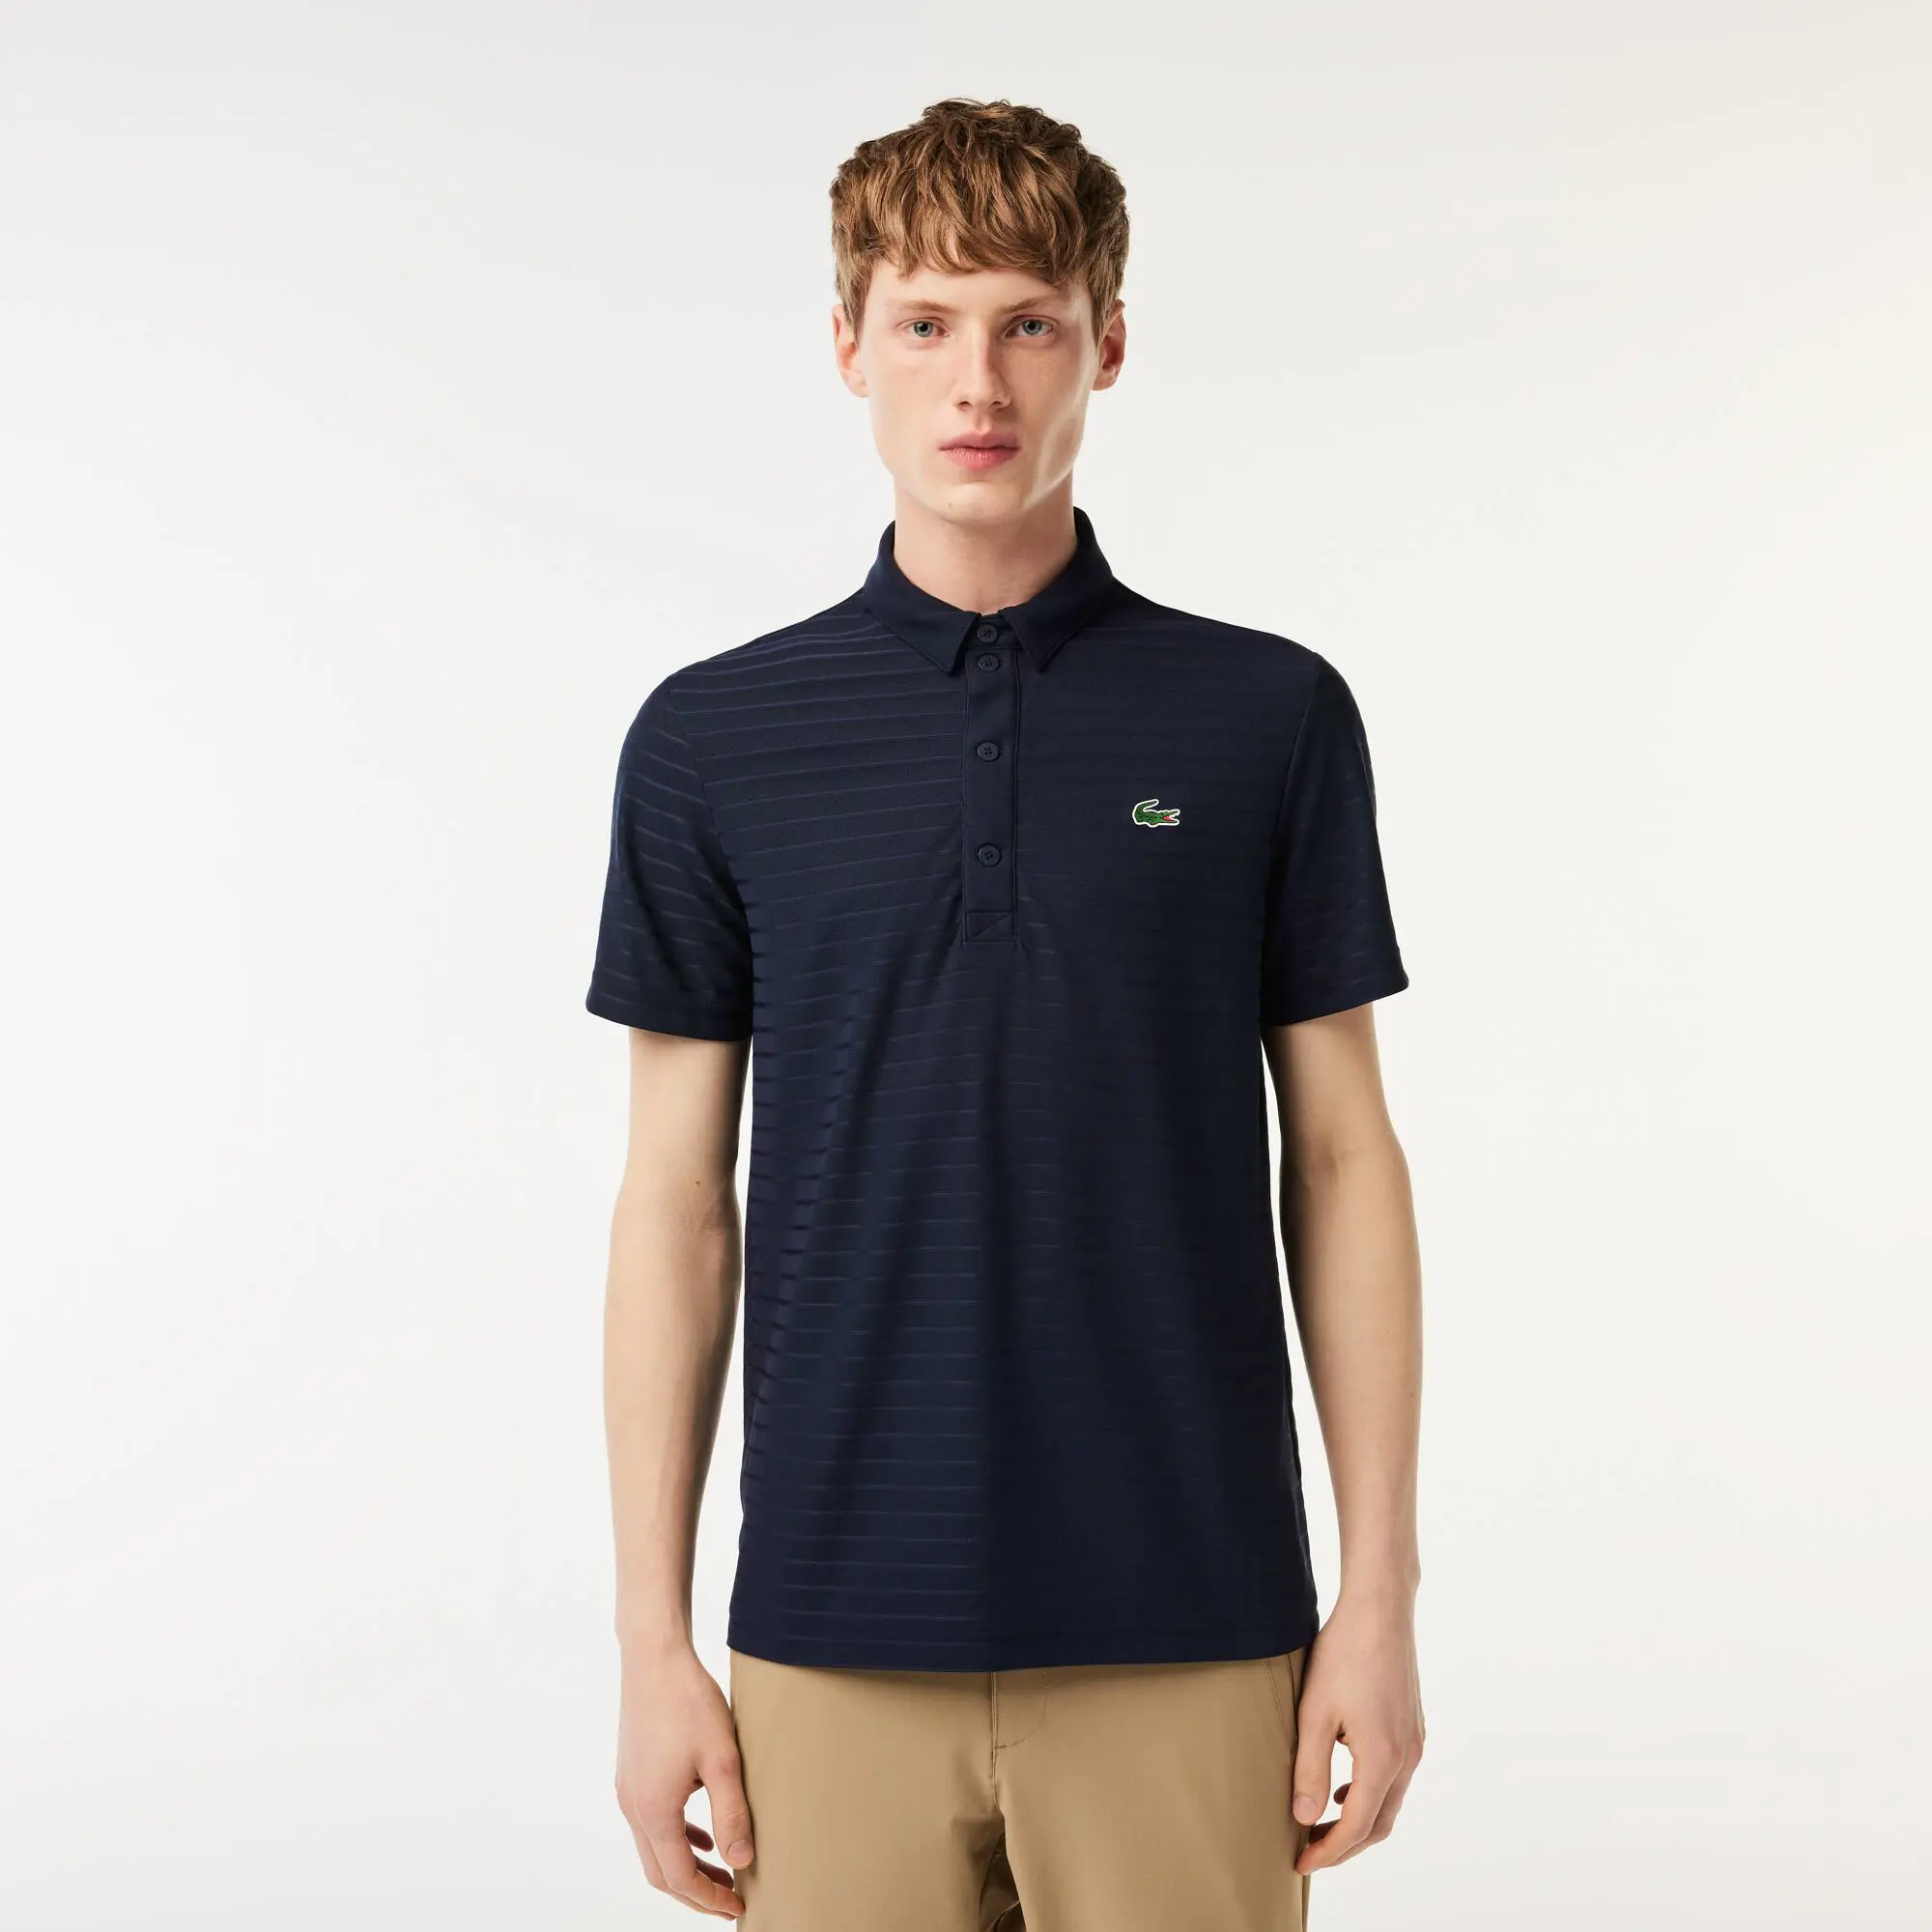 Lacoste Men's Lacoste SPORT Textured Breathable Golf Polo Shirt. 1